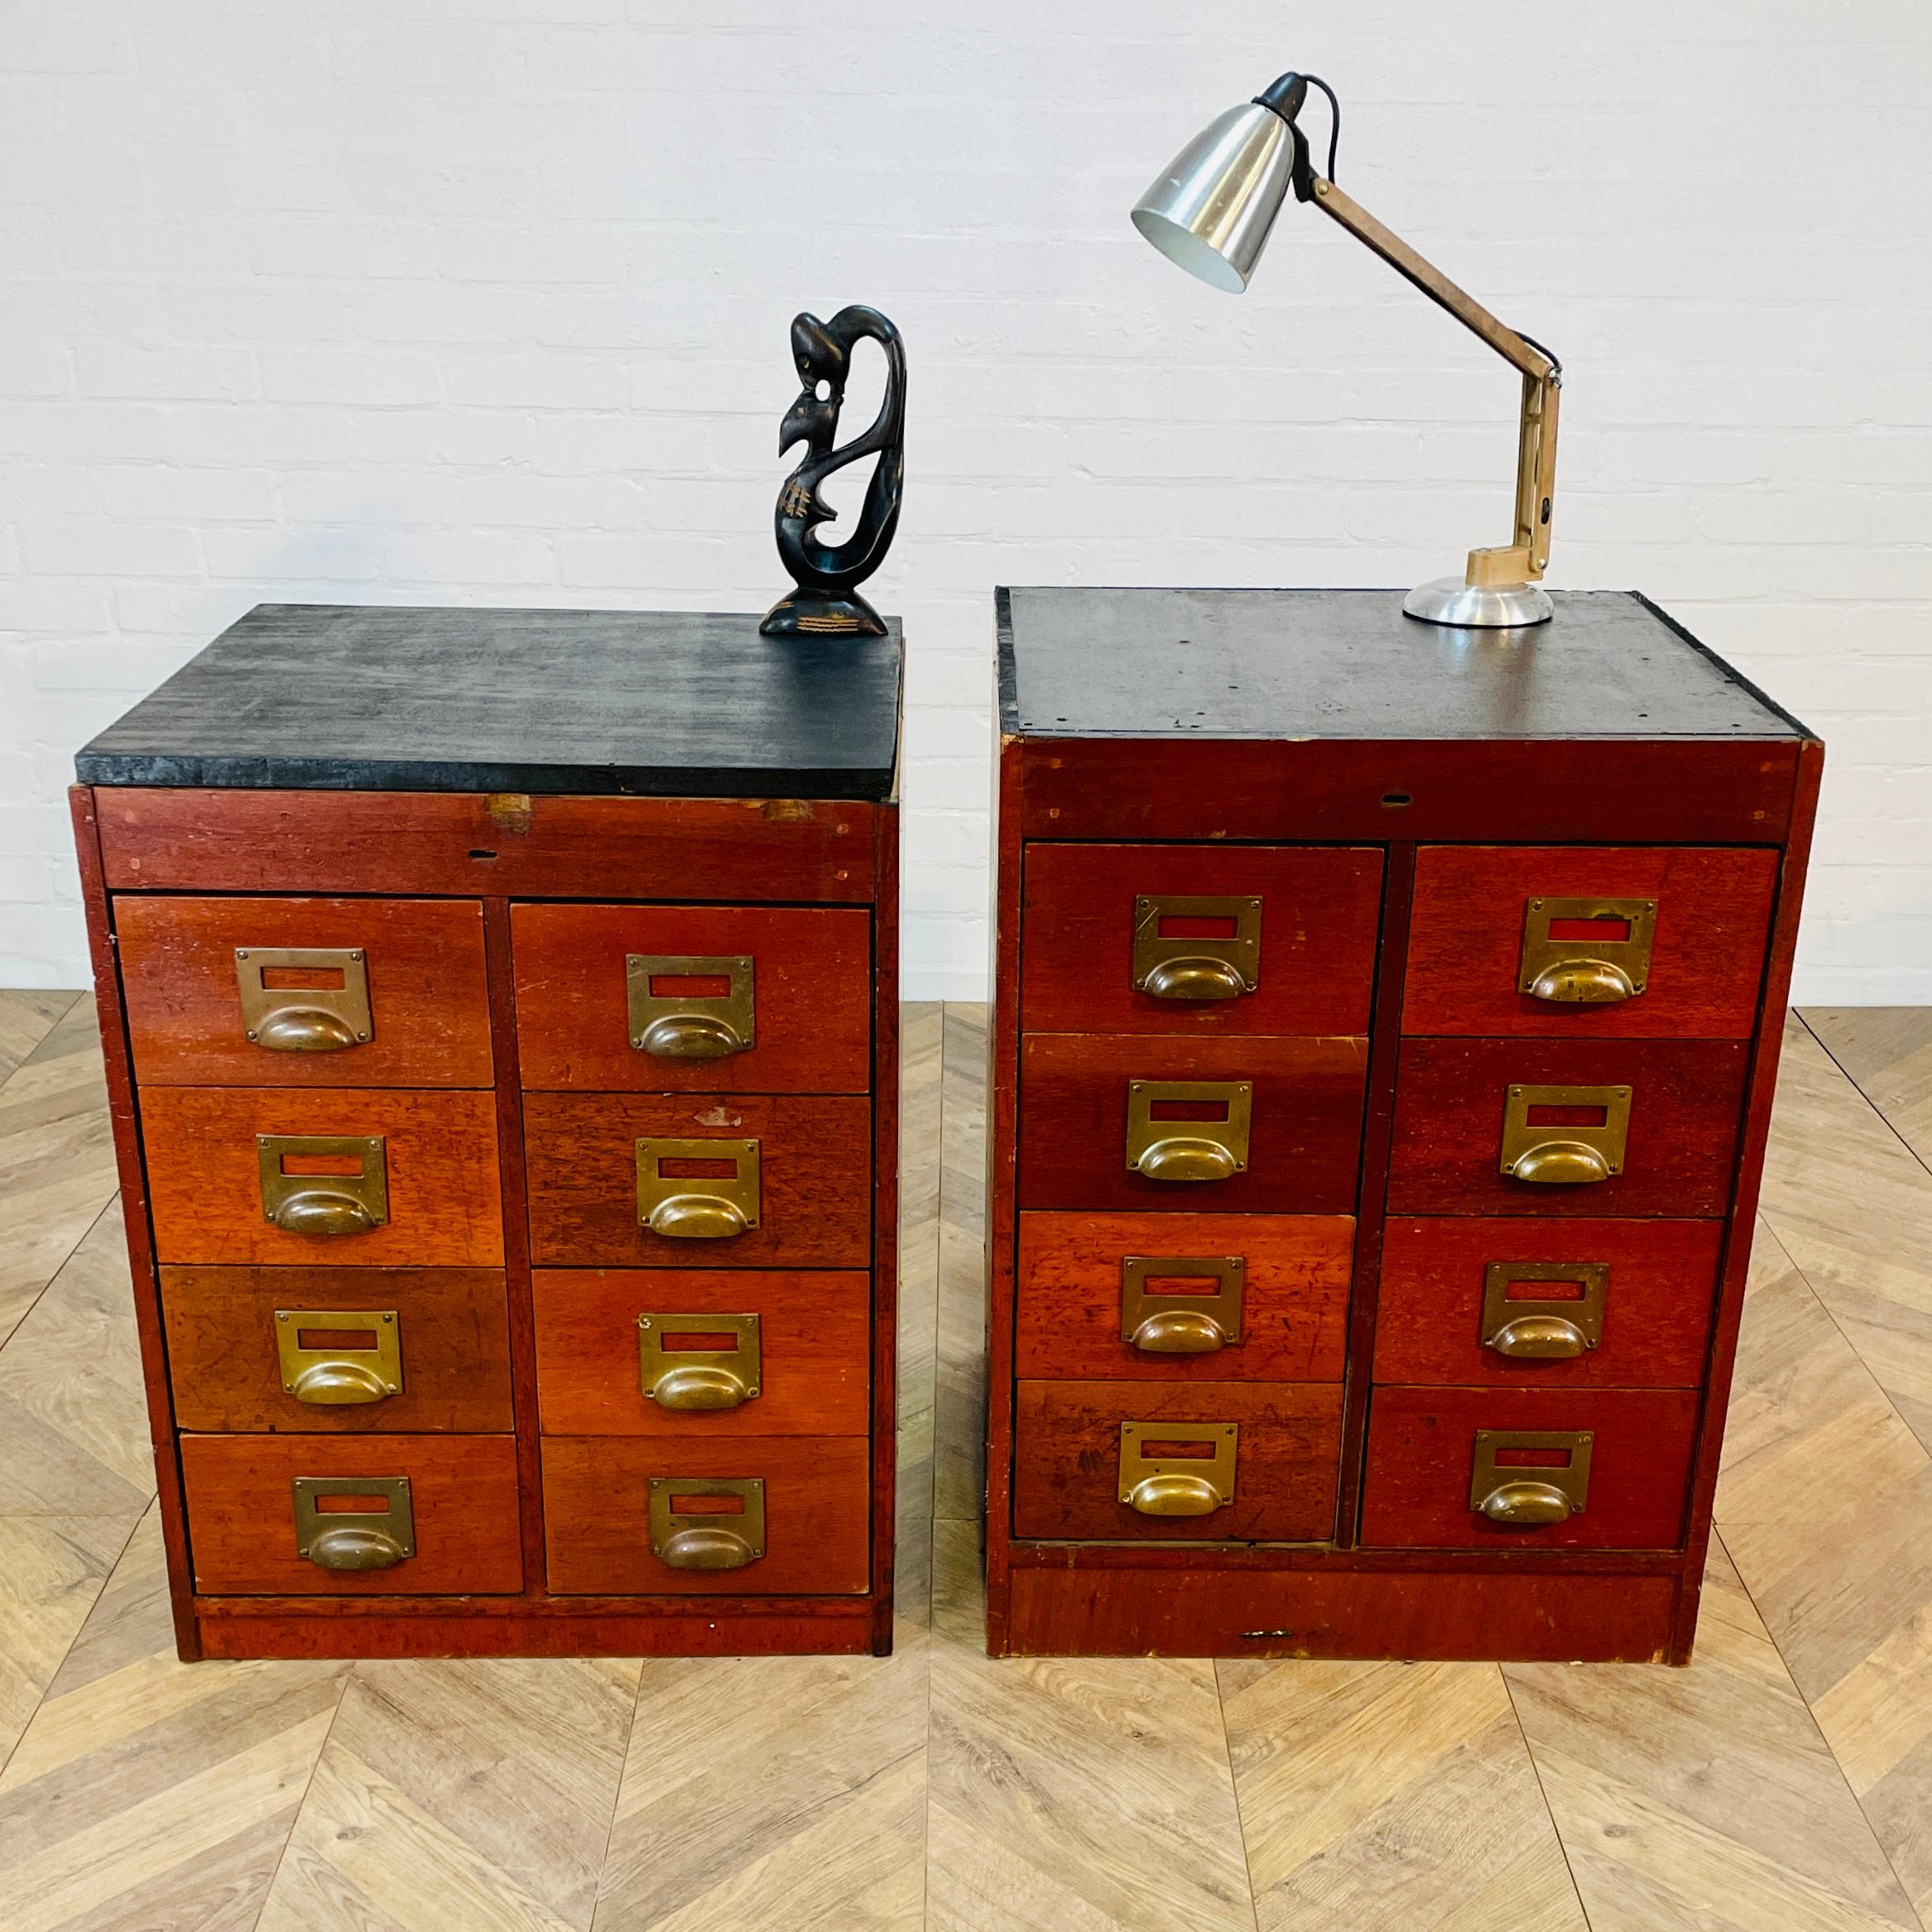 A Beautiful Pair of Antique Industrial Drawers, circa 1900s

Each one boasts 8 drawers with original brass handles. They are well proportioned and have a lovely worn patina, but still in good vintage condition, in-keeping with its age and